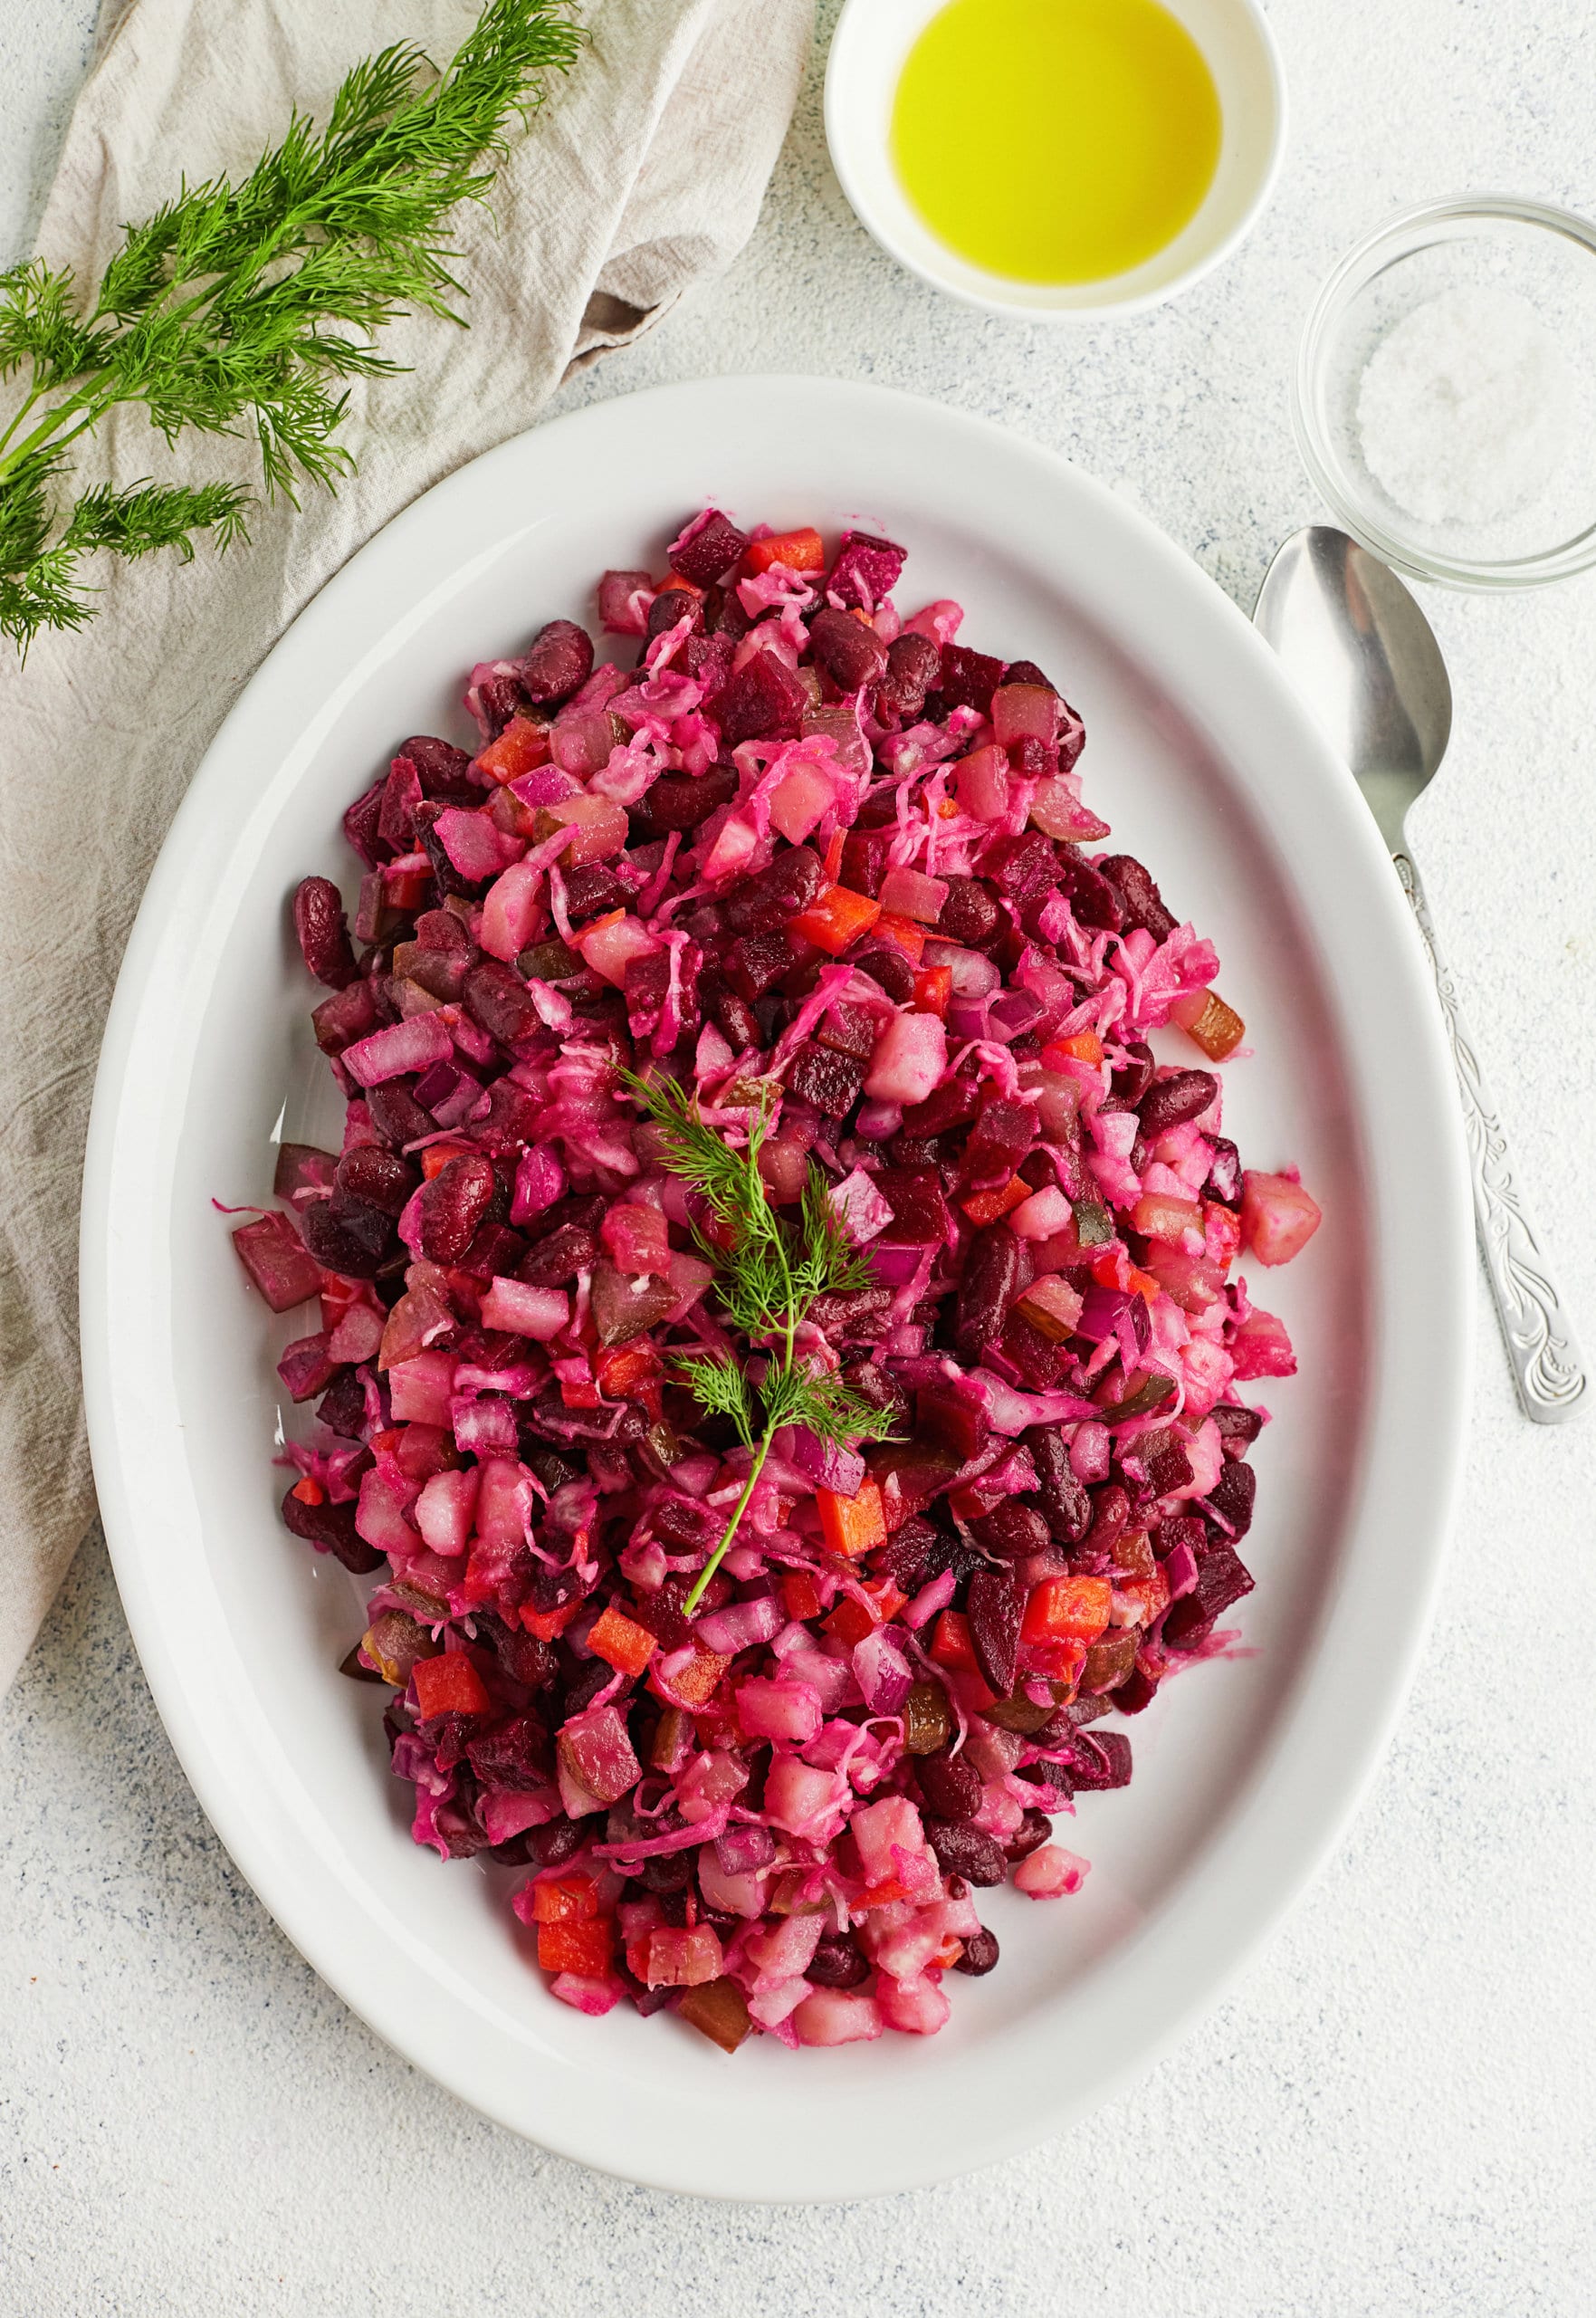 Russian Vinaigrette Recipe with Sauerkraut and Beets - All We Eat